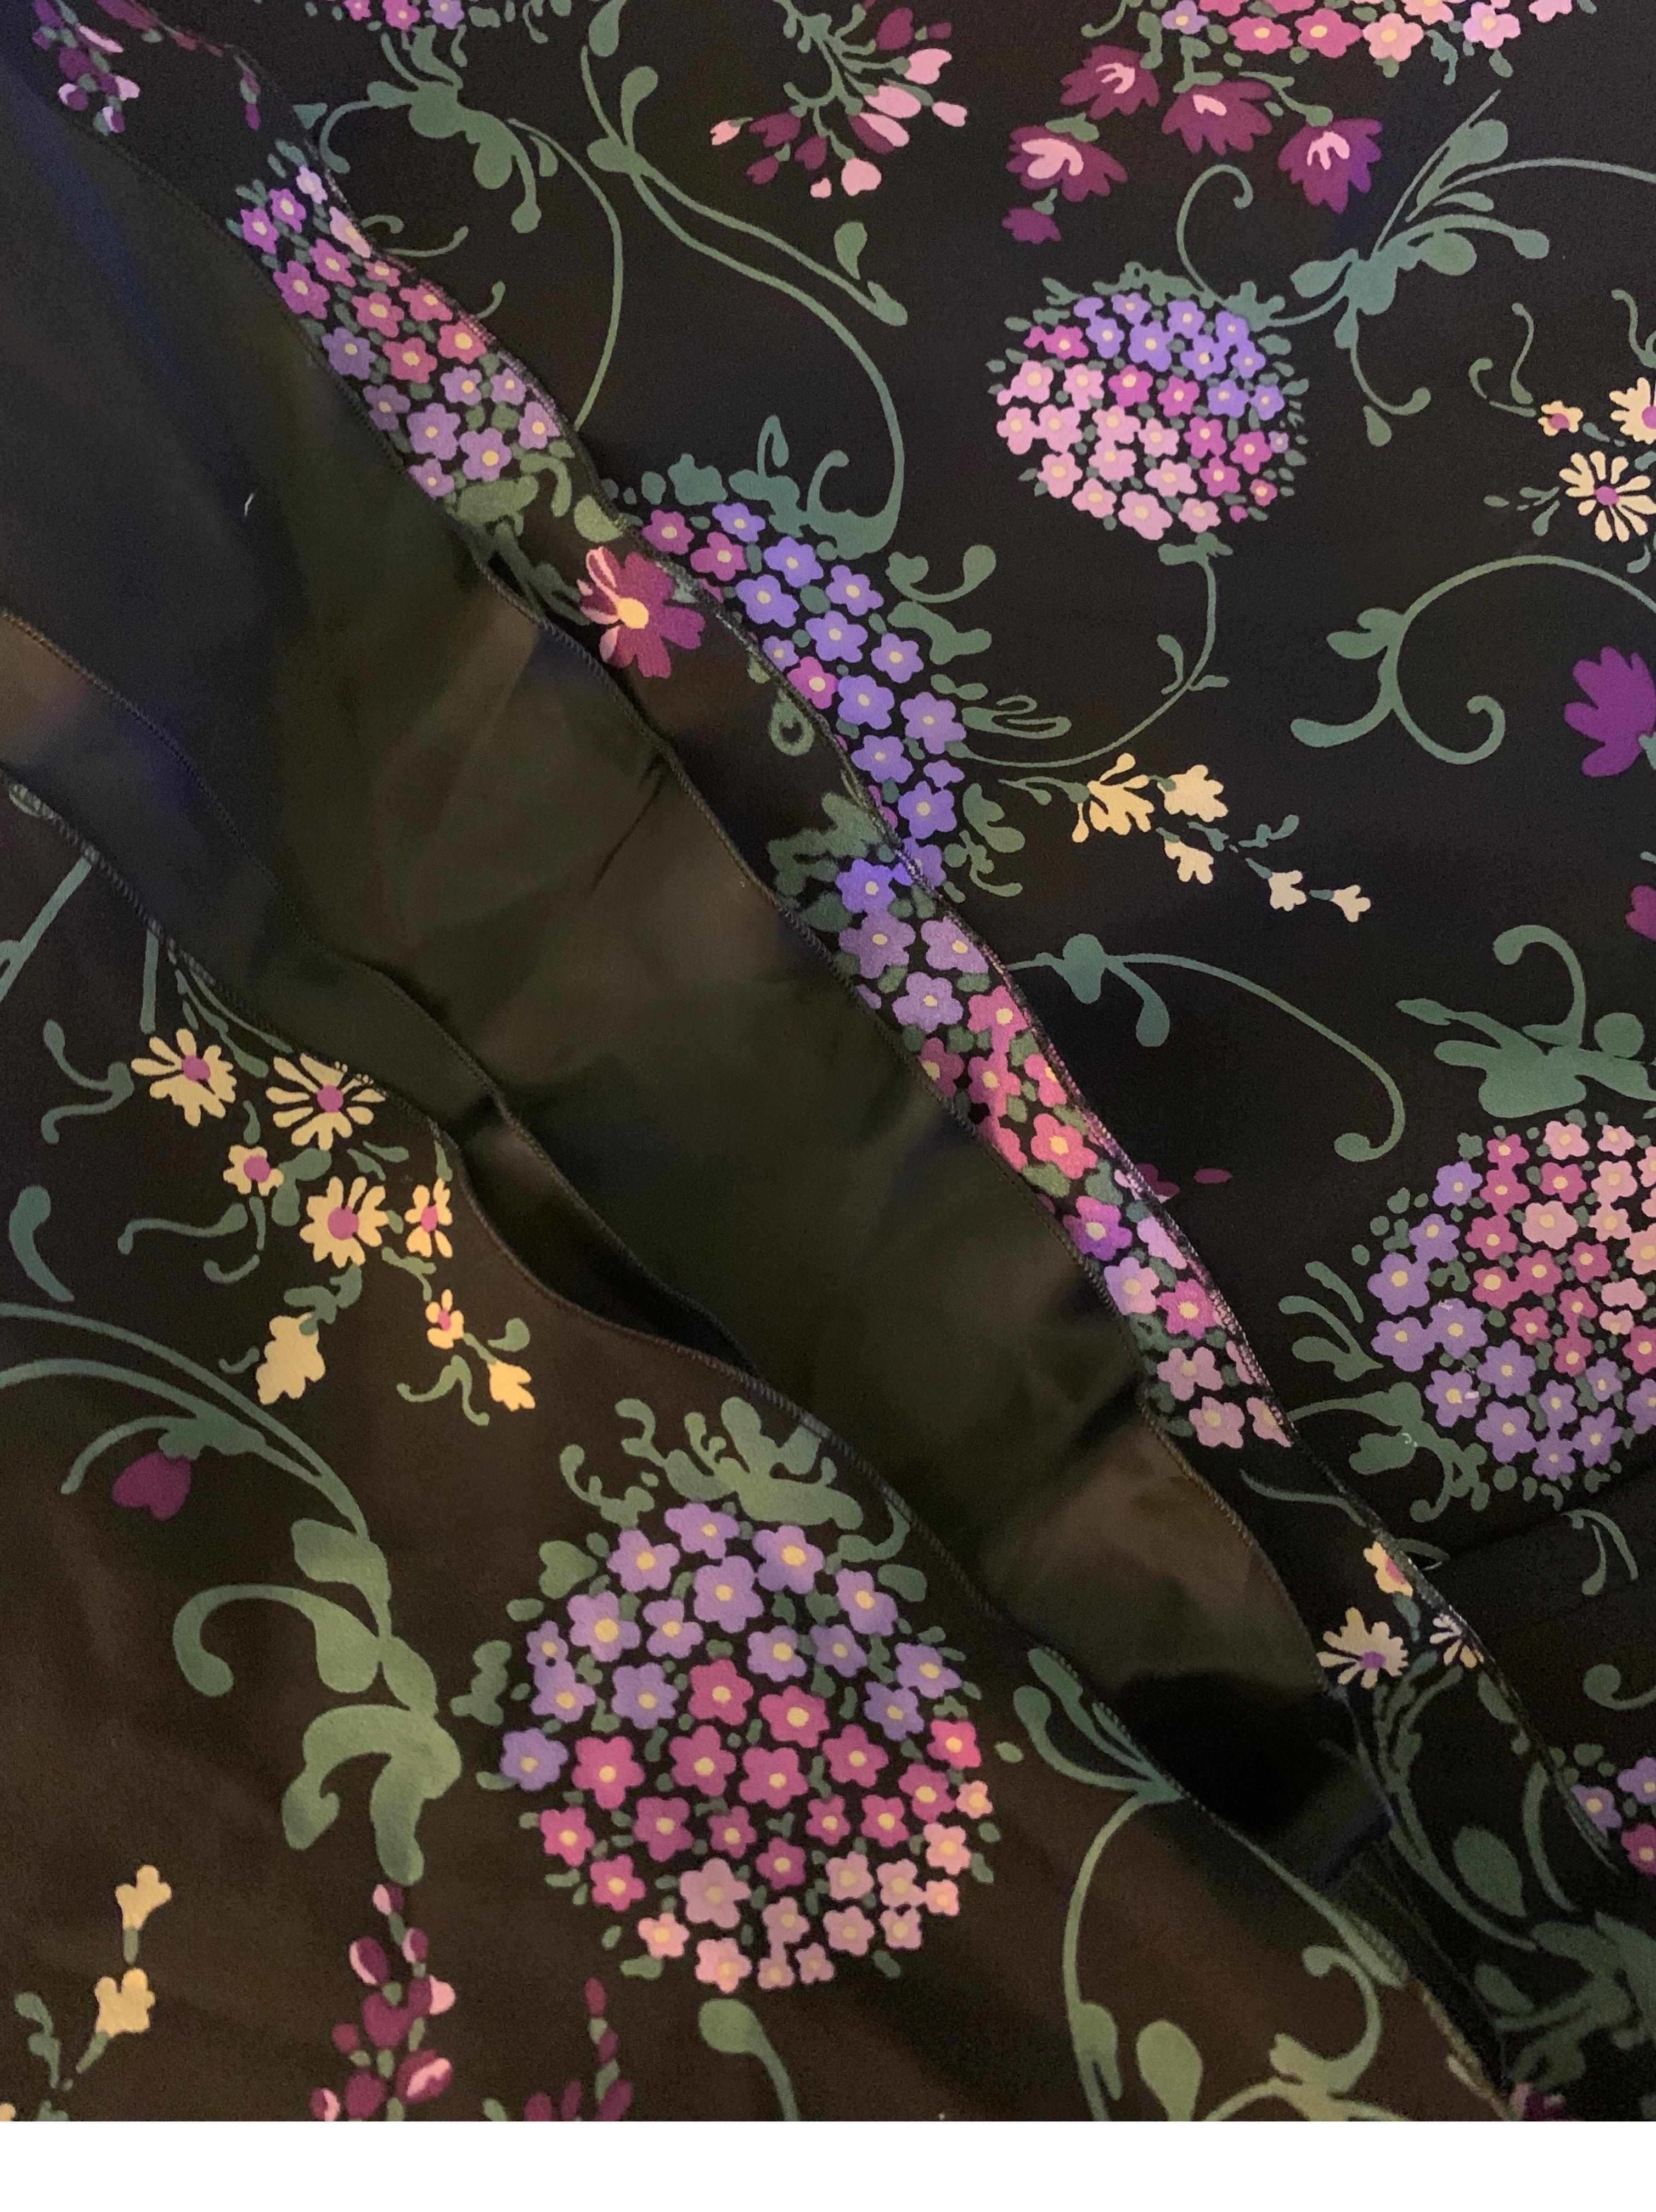 Moschino Cheap & Chic Silk Hydrangea Floral Maxi Skirt, Italy Size 8 In Good Condition For Sale In Palm Springs, CA